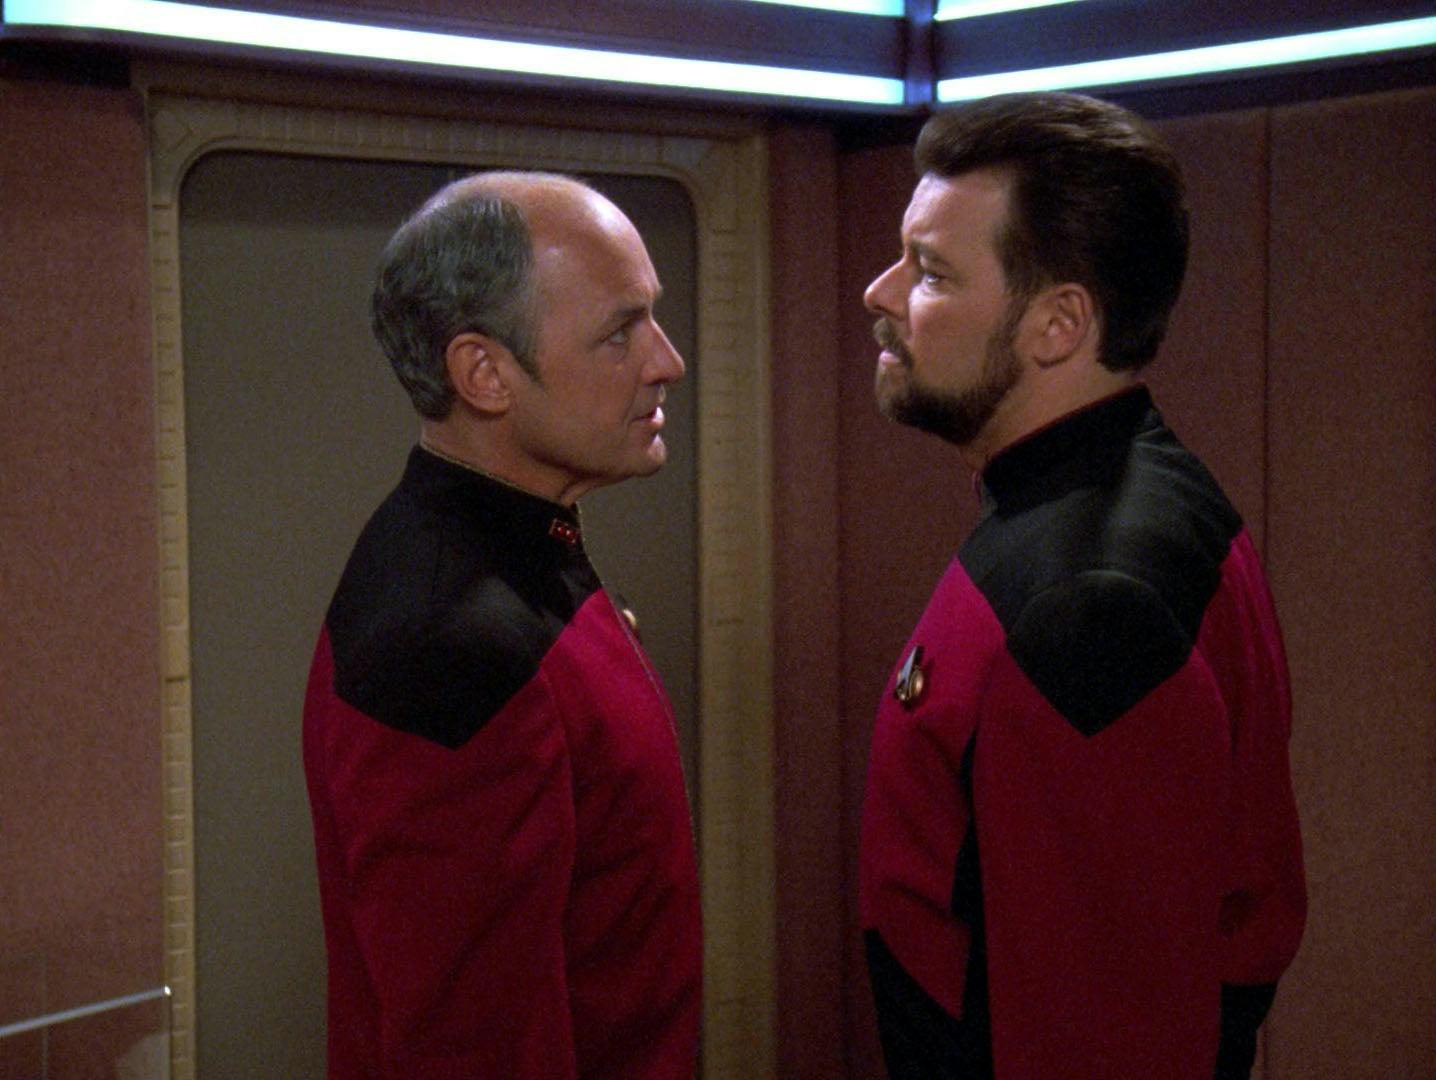 Admiral Pressman (Terry O’Quinn) makes it clear to Commander Riker (Jonathan Frakes) once again that the illegal cloaking technology on The Pegasus is more important to him than Enterprise or the lives of her crew, “The Pegasus”